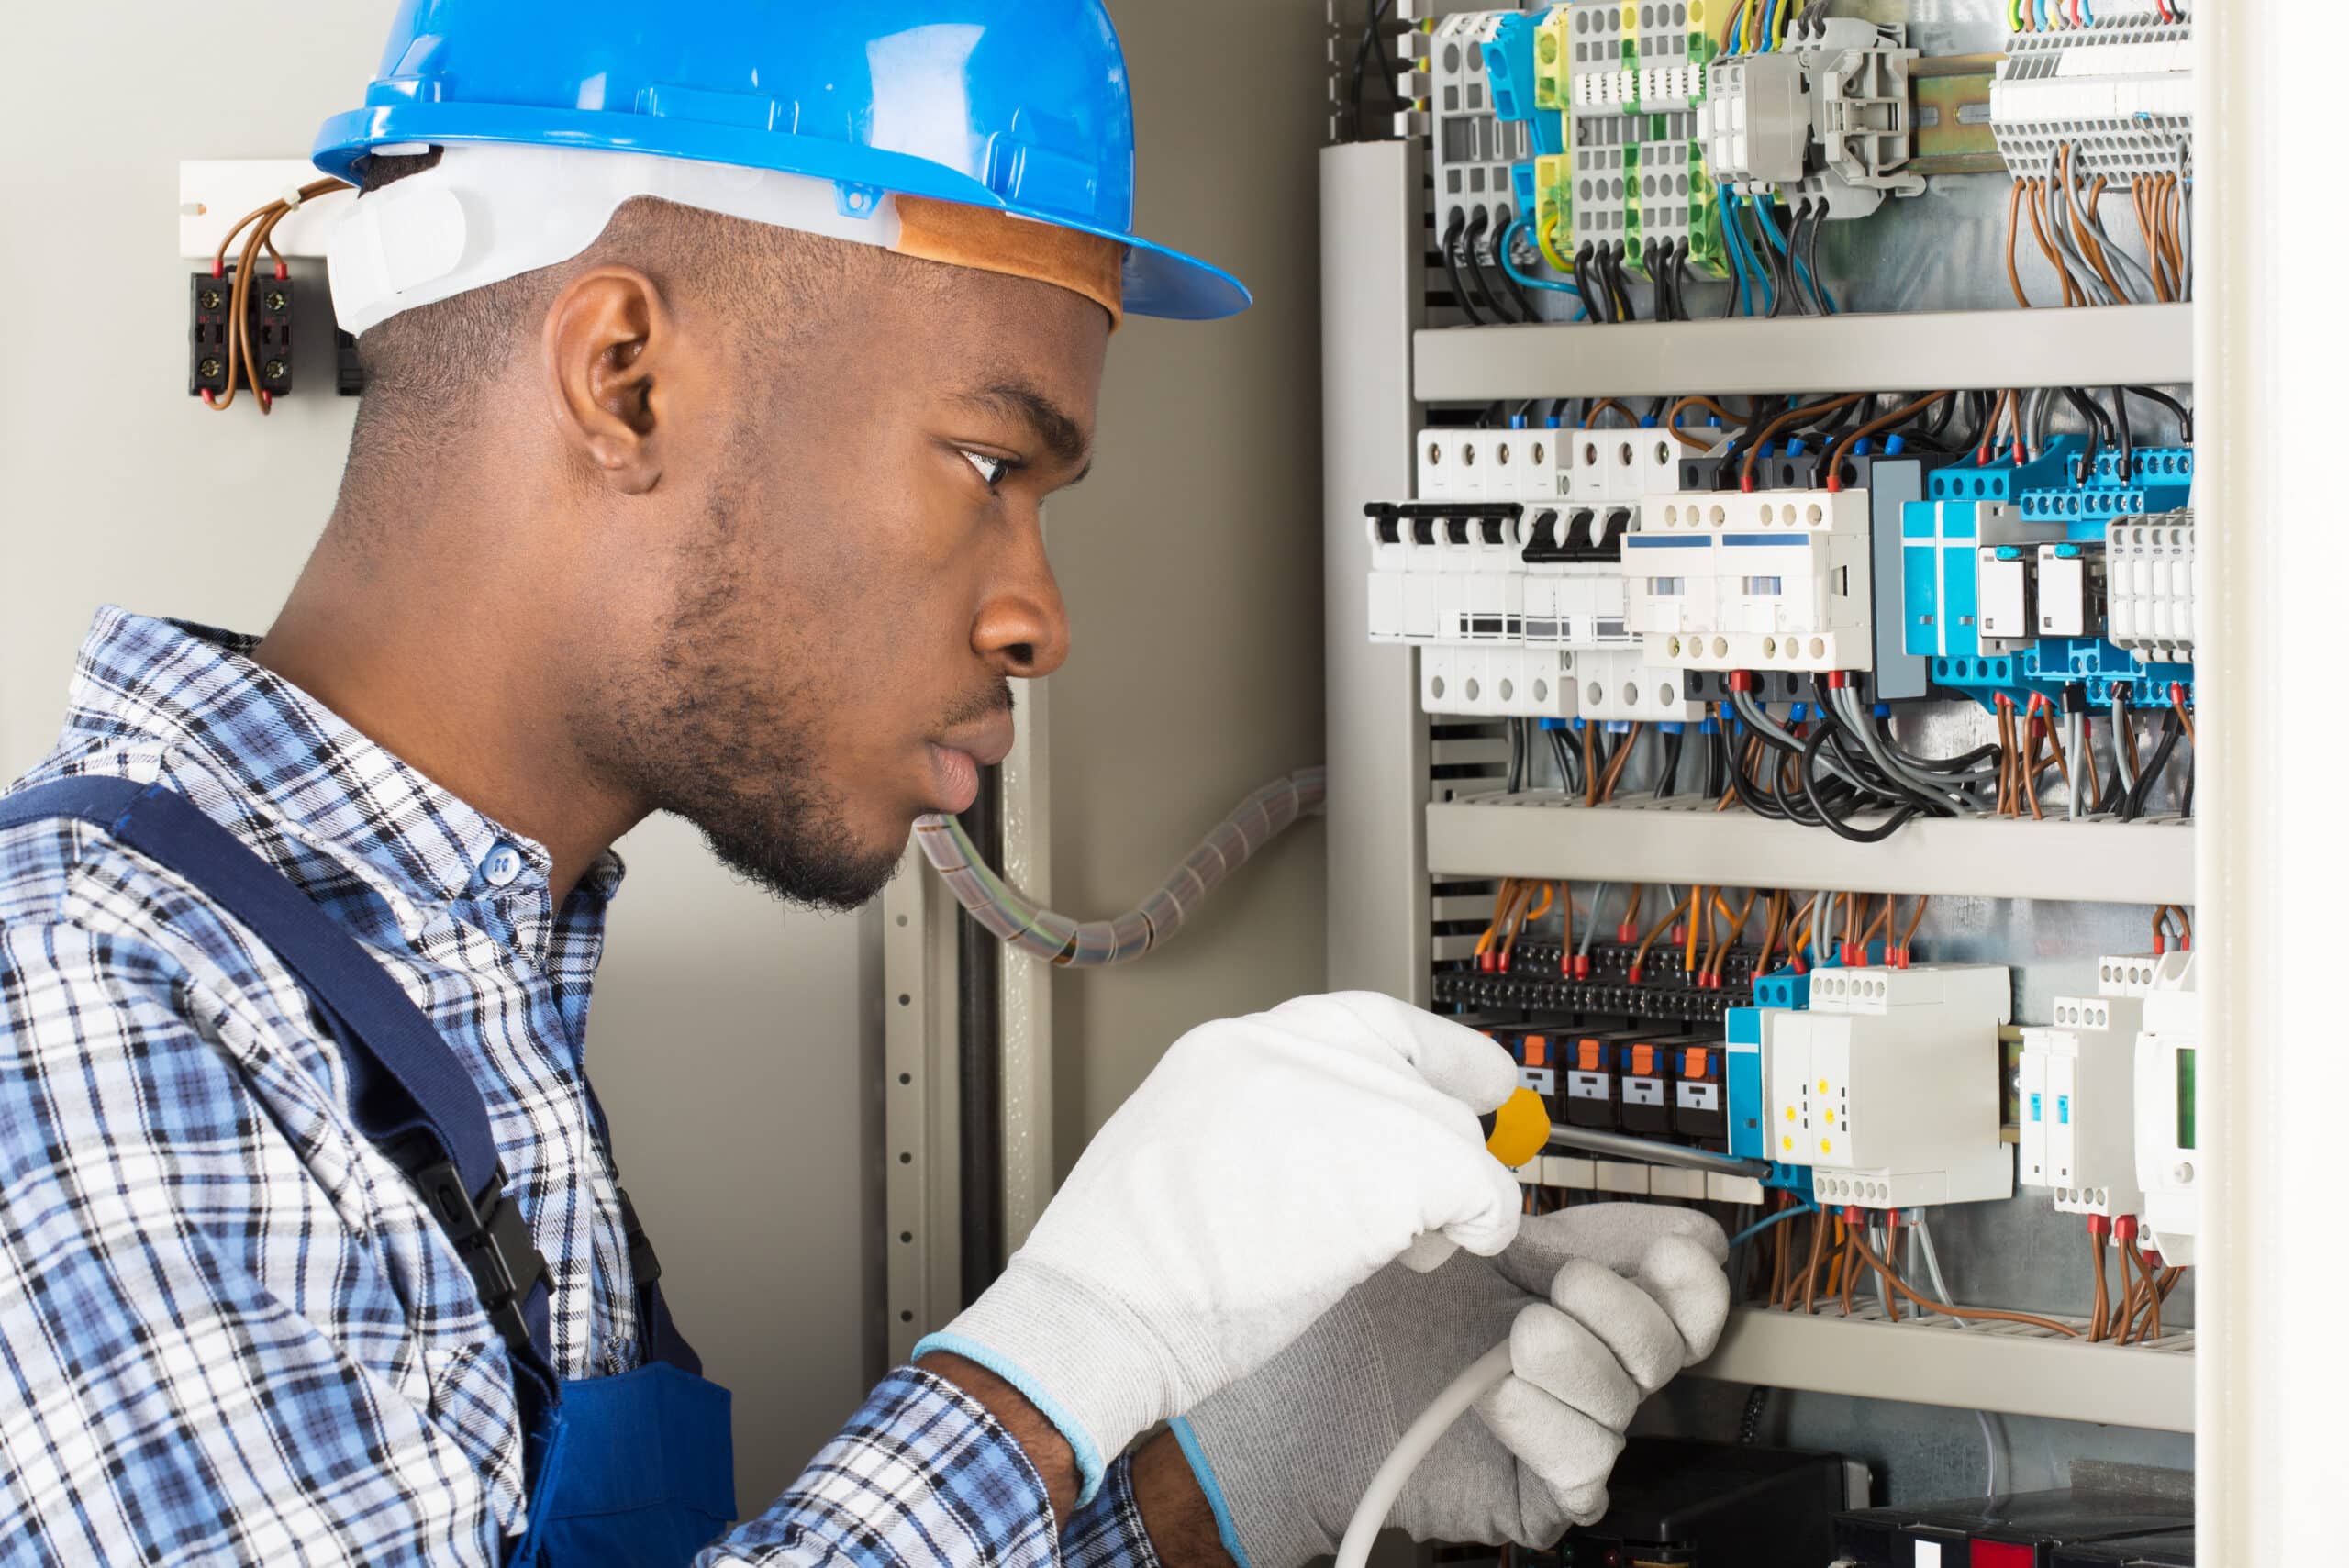 An apprentice in a hard hat working on an electrical panel